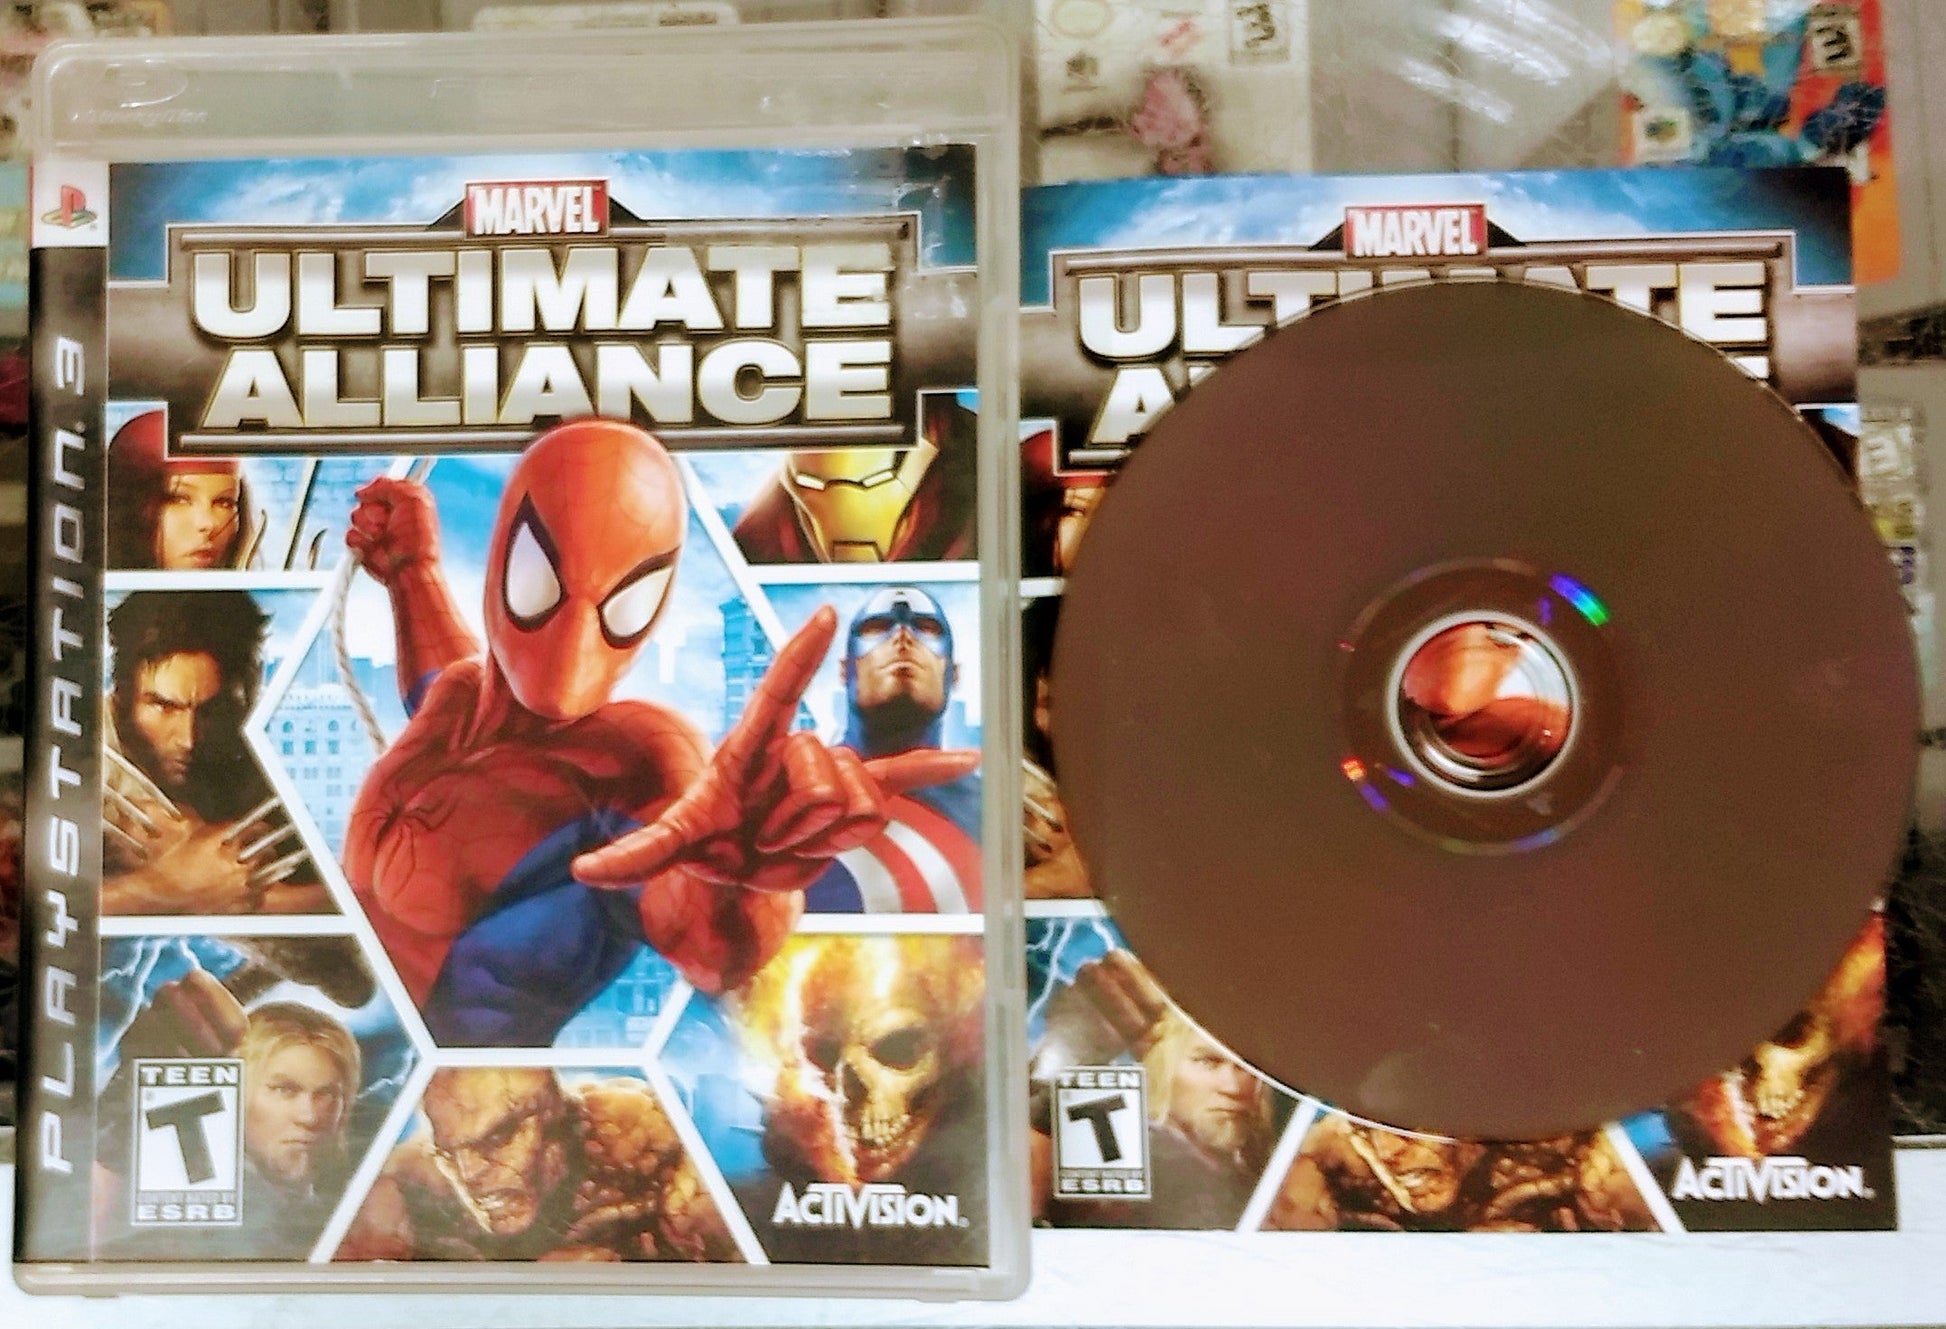 MARVEL ULTIMATE ALLIANCE (PLAYSTATION 3 PS3) - jeux video game-x